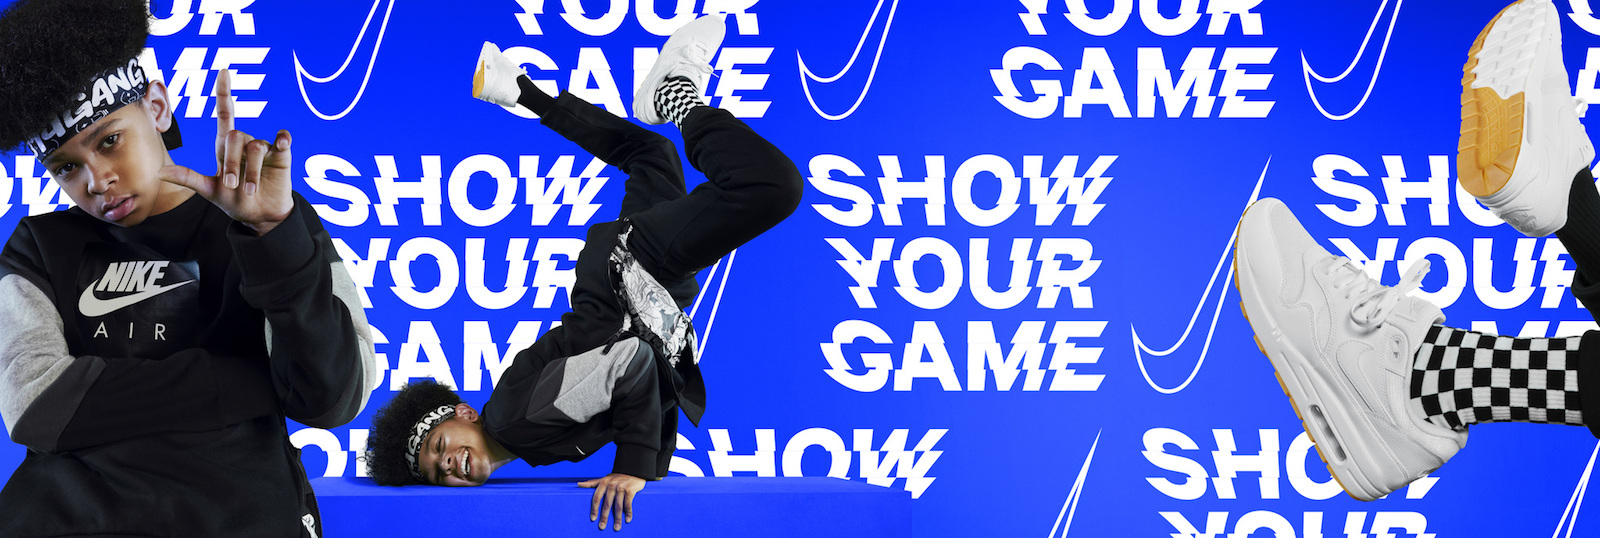 SHOW YOUR GAME | Nike